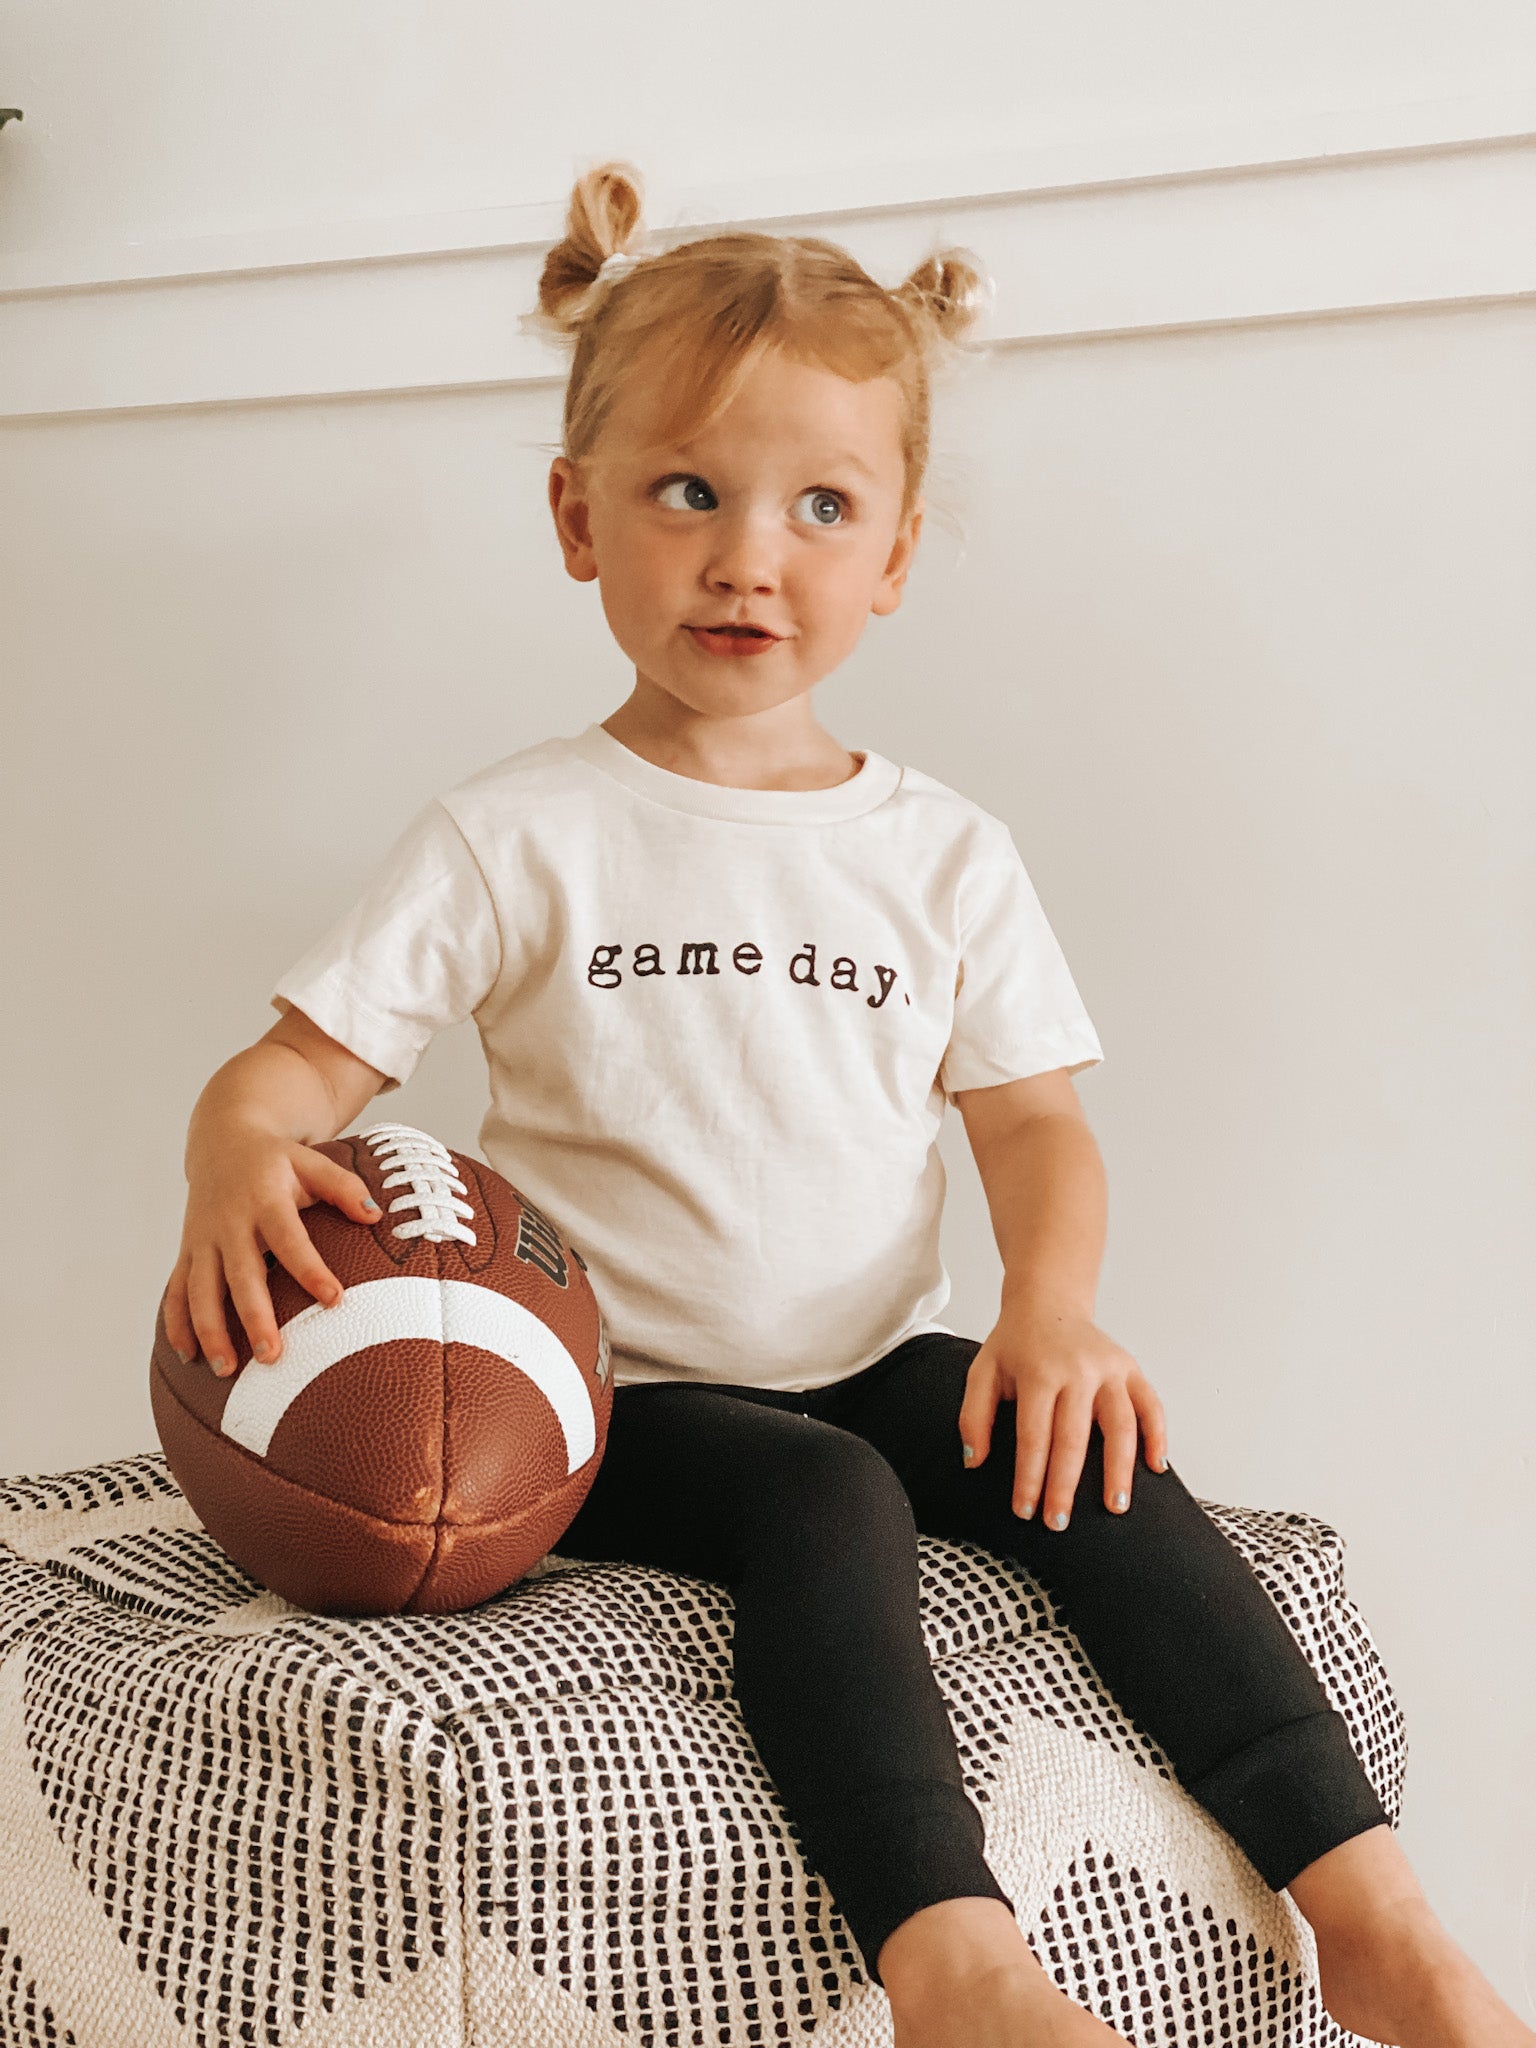 game day football outfit for baby kids toddler boy girl infant newborn tee tshirt leggings black neutral outfit bamboo organic cotton